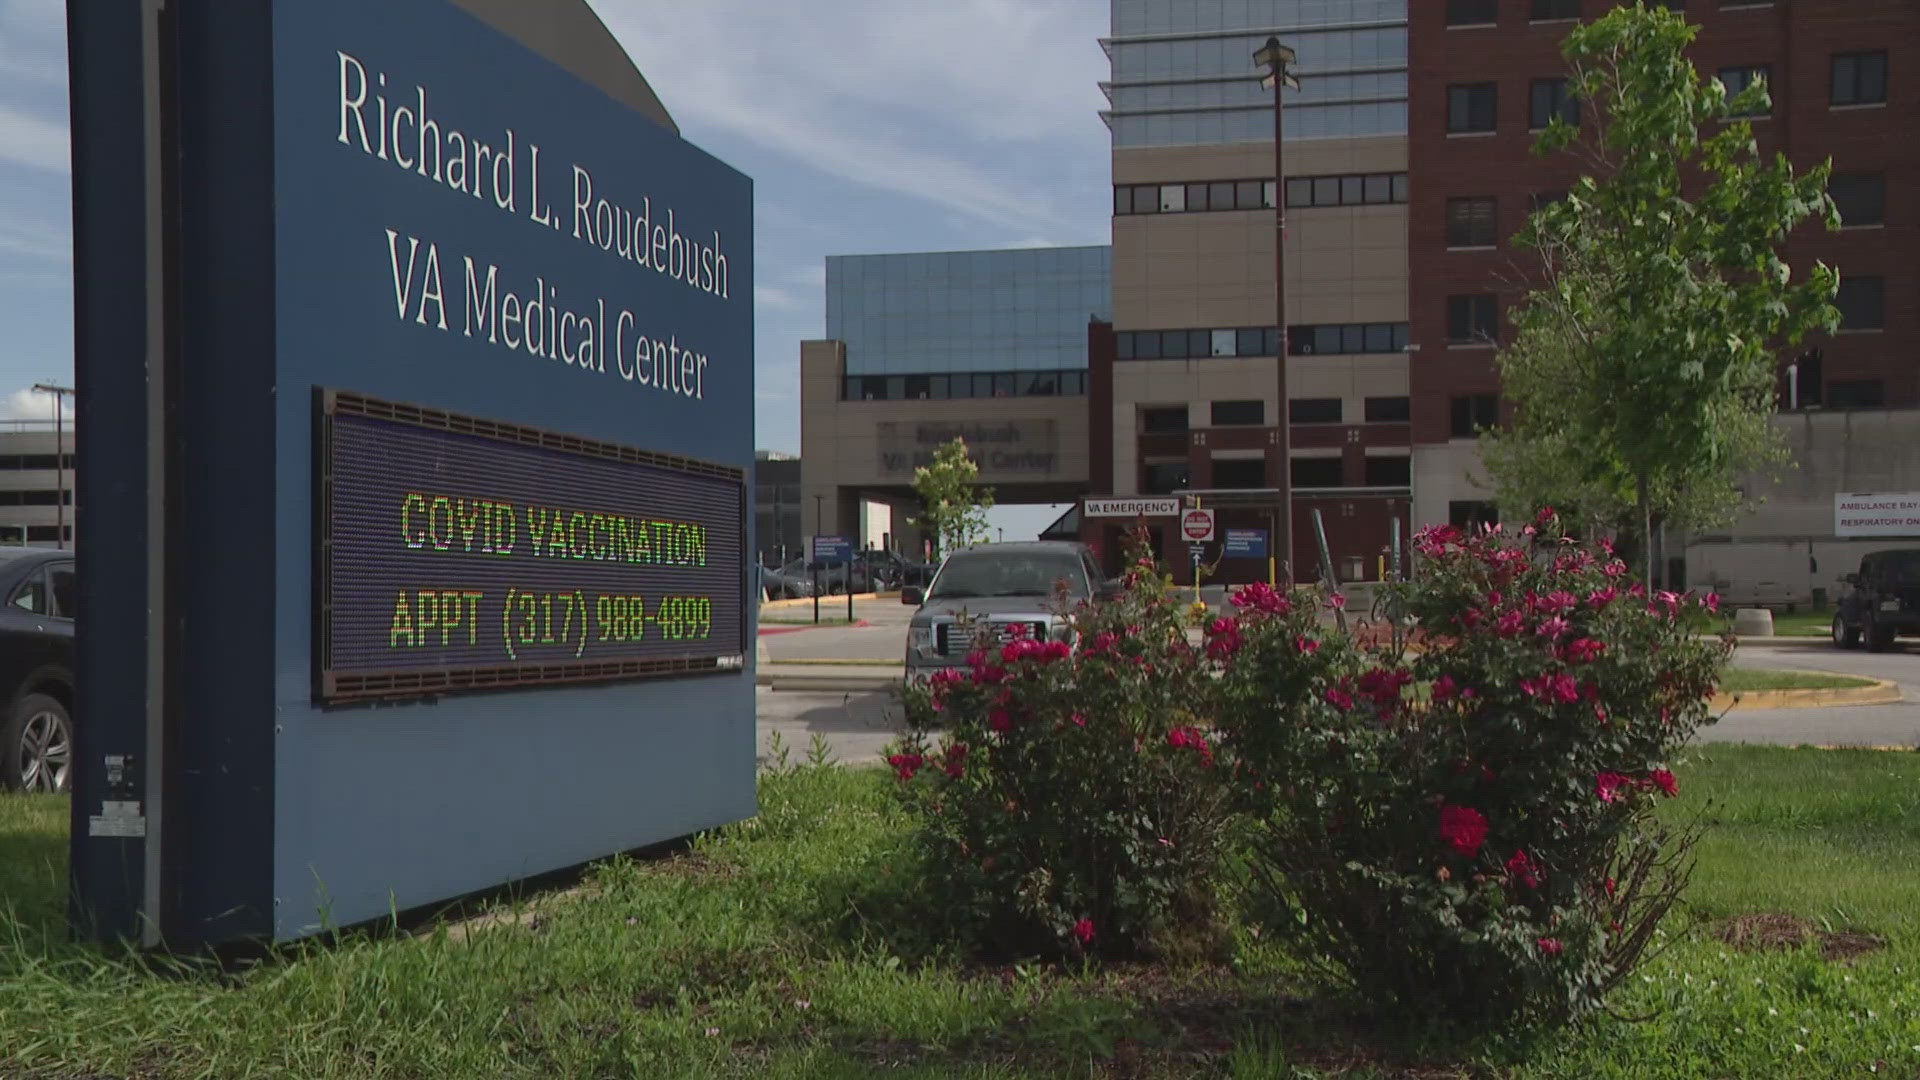 The VA says the problem was first discovered last month as nurses and surgeons prepared to perform operations inside the Indianapolis VA hospital.